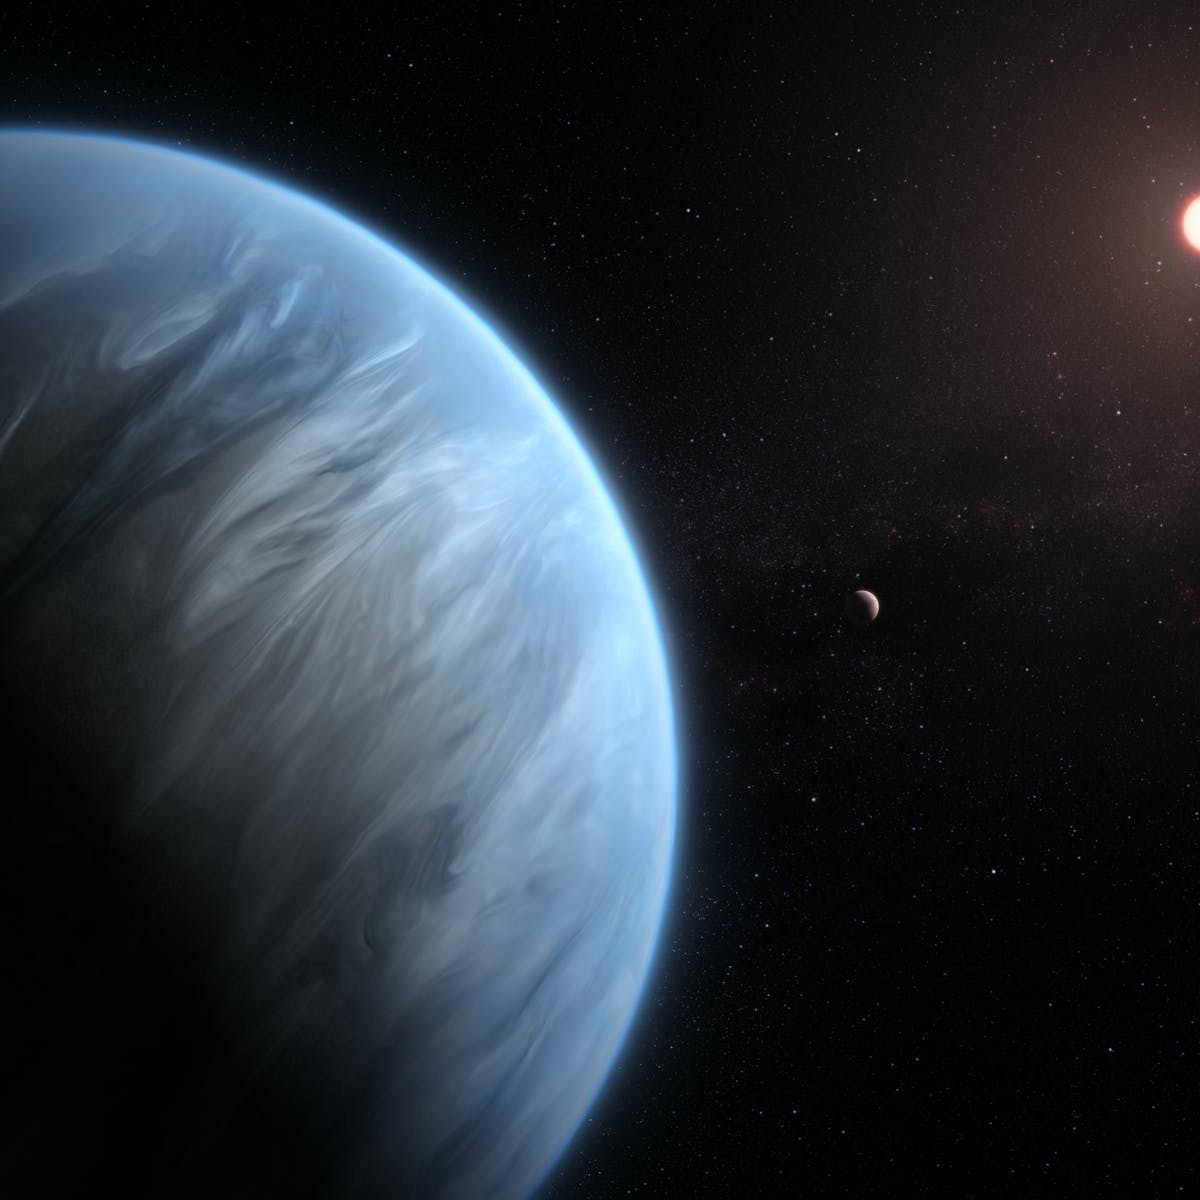 An Earth Sized Planet Found In The Habitable Zone Of A Nearby Star